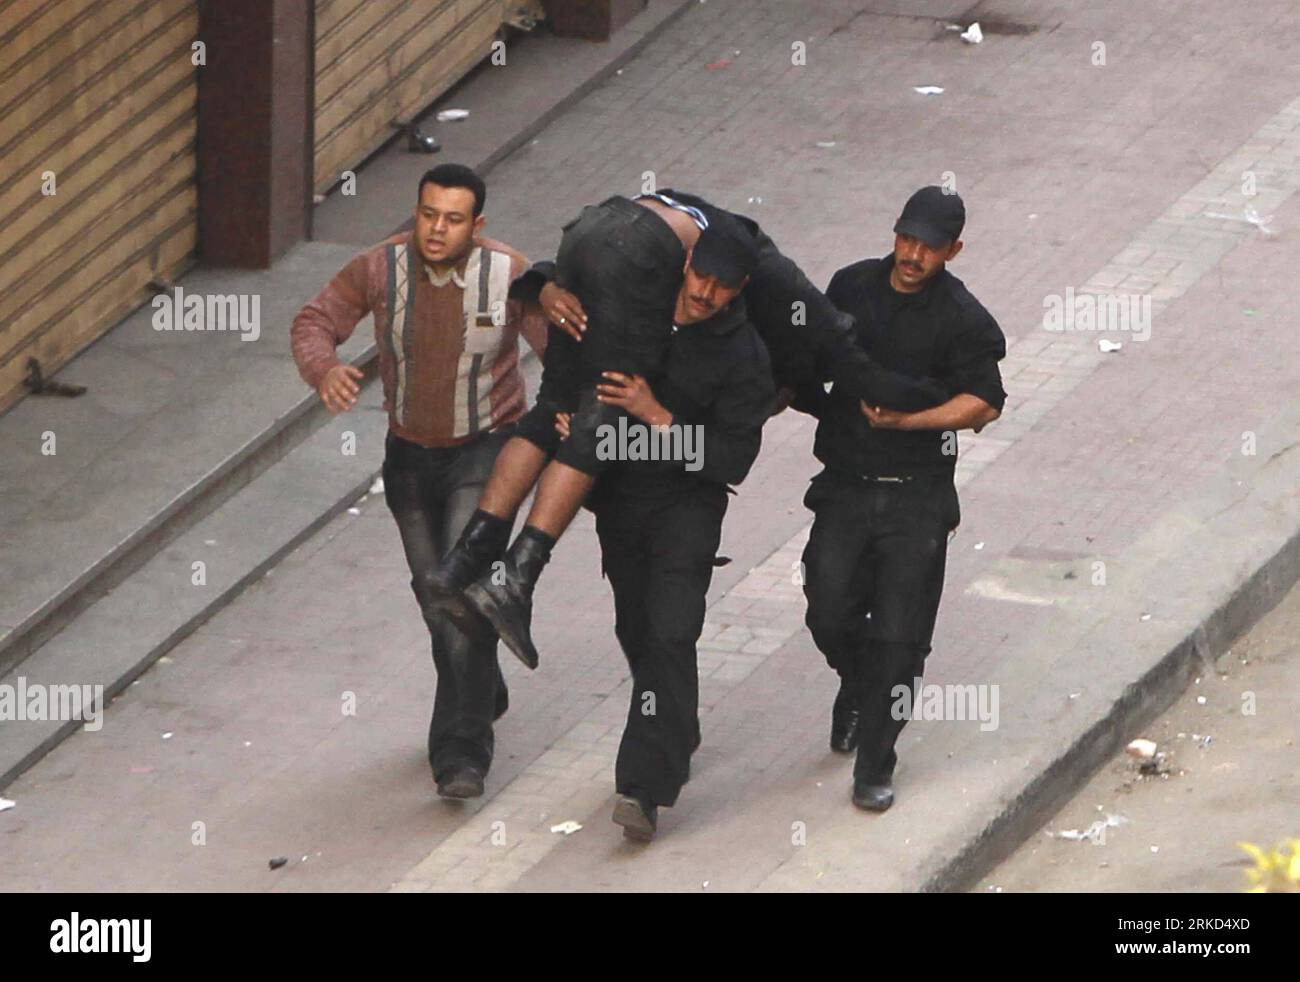 Bildnummer: 54862599  Datum: 28.01.2011  Copyright: imago/Xinhua (110129) -- CAIRO, Jan. 29, 2011 (Xinhua) -- The police evacuate the wounded during a protest on liberation square in Cairo, Egypt, Jan. 28, 2011. Internet service has been shut down in Cairo since midnight Friday as protestors are reportedly planning massive gatherings after prayers. Mobile phone communication was also disrupted on Friday morning. (Xinhua/Cai Yang)(xhn) EGYPT-CAIRO-PROTEST PUBLICATIONxNOTxINxCHN Gesellschaft Politik Ägypten Unruhen Aufstand Proteste Ausschreitungen premiumd kbdig xng 2011 quer o0 Verletzte Bergu Stock Photo